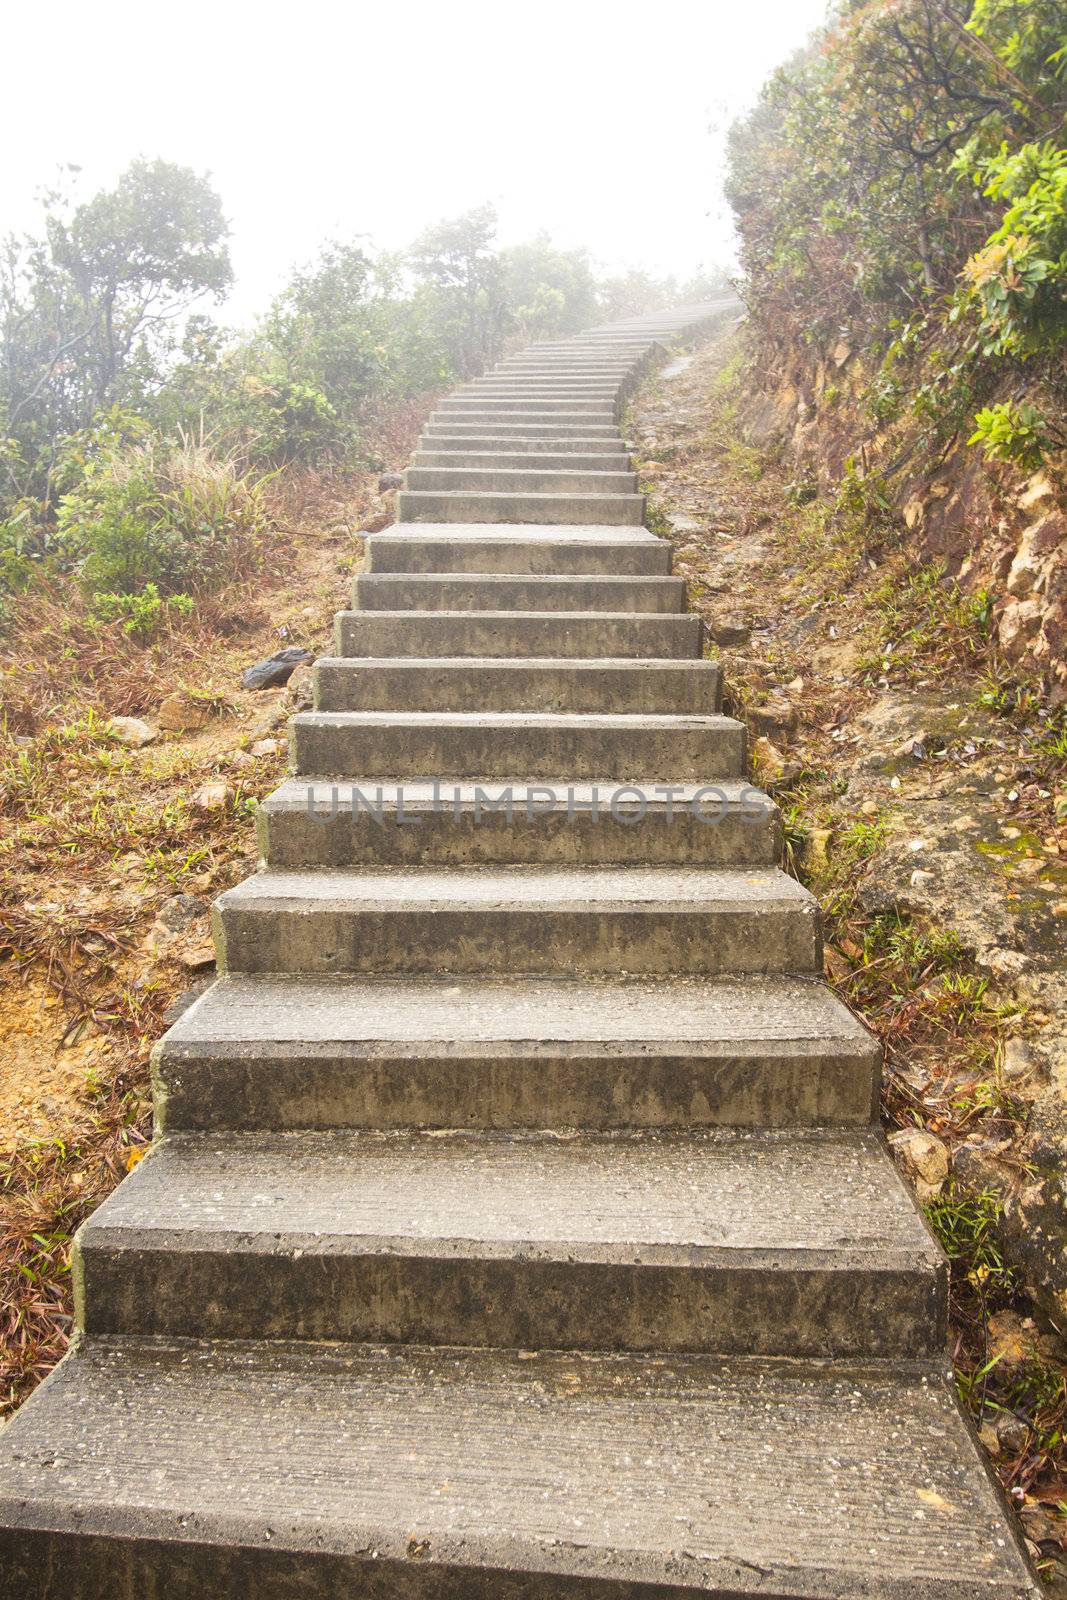 Stairs in hiking trail in Hong Kong by kawing921